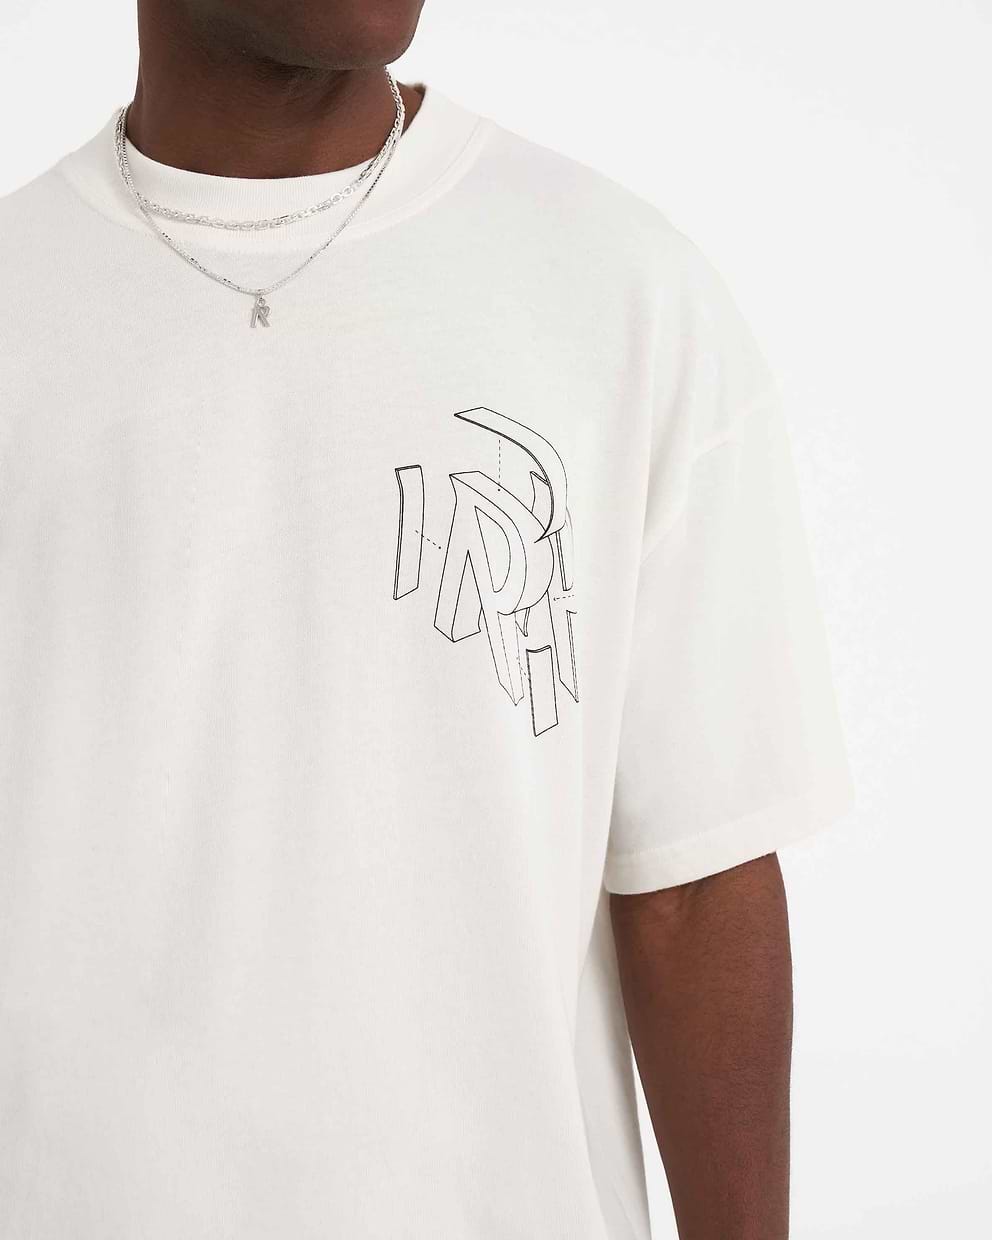 Initial Assembly Outline T-Shirt - Flat White